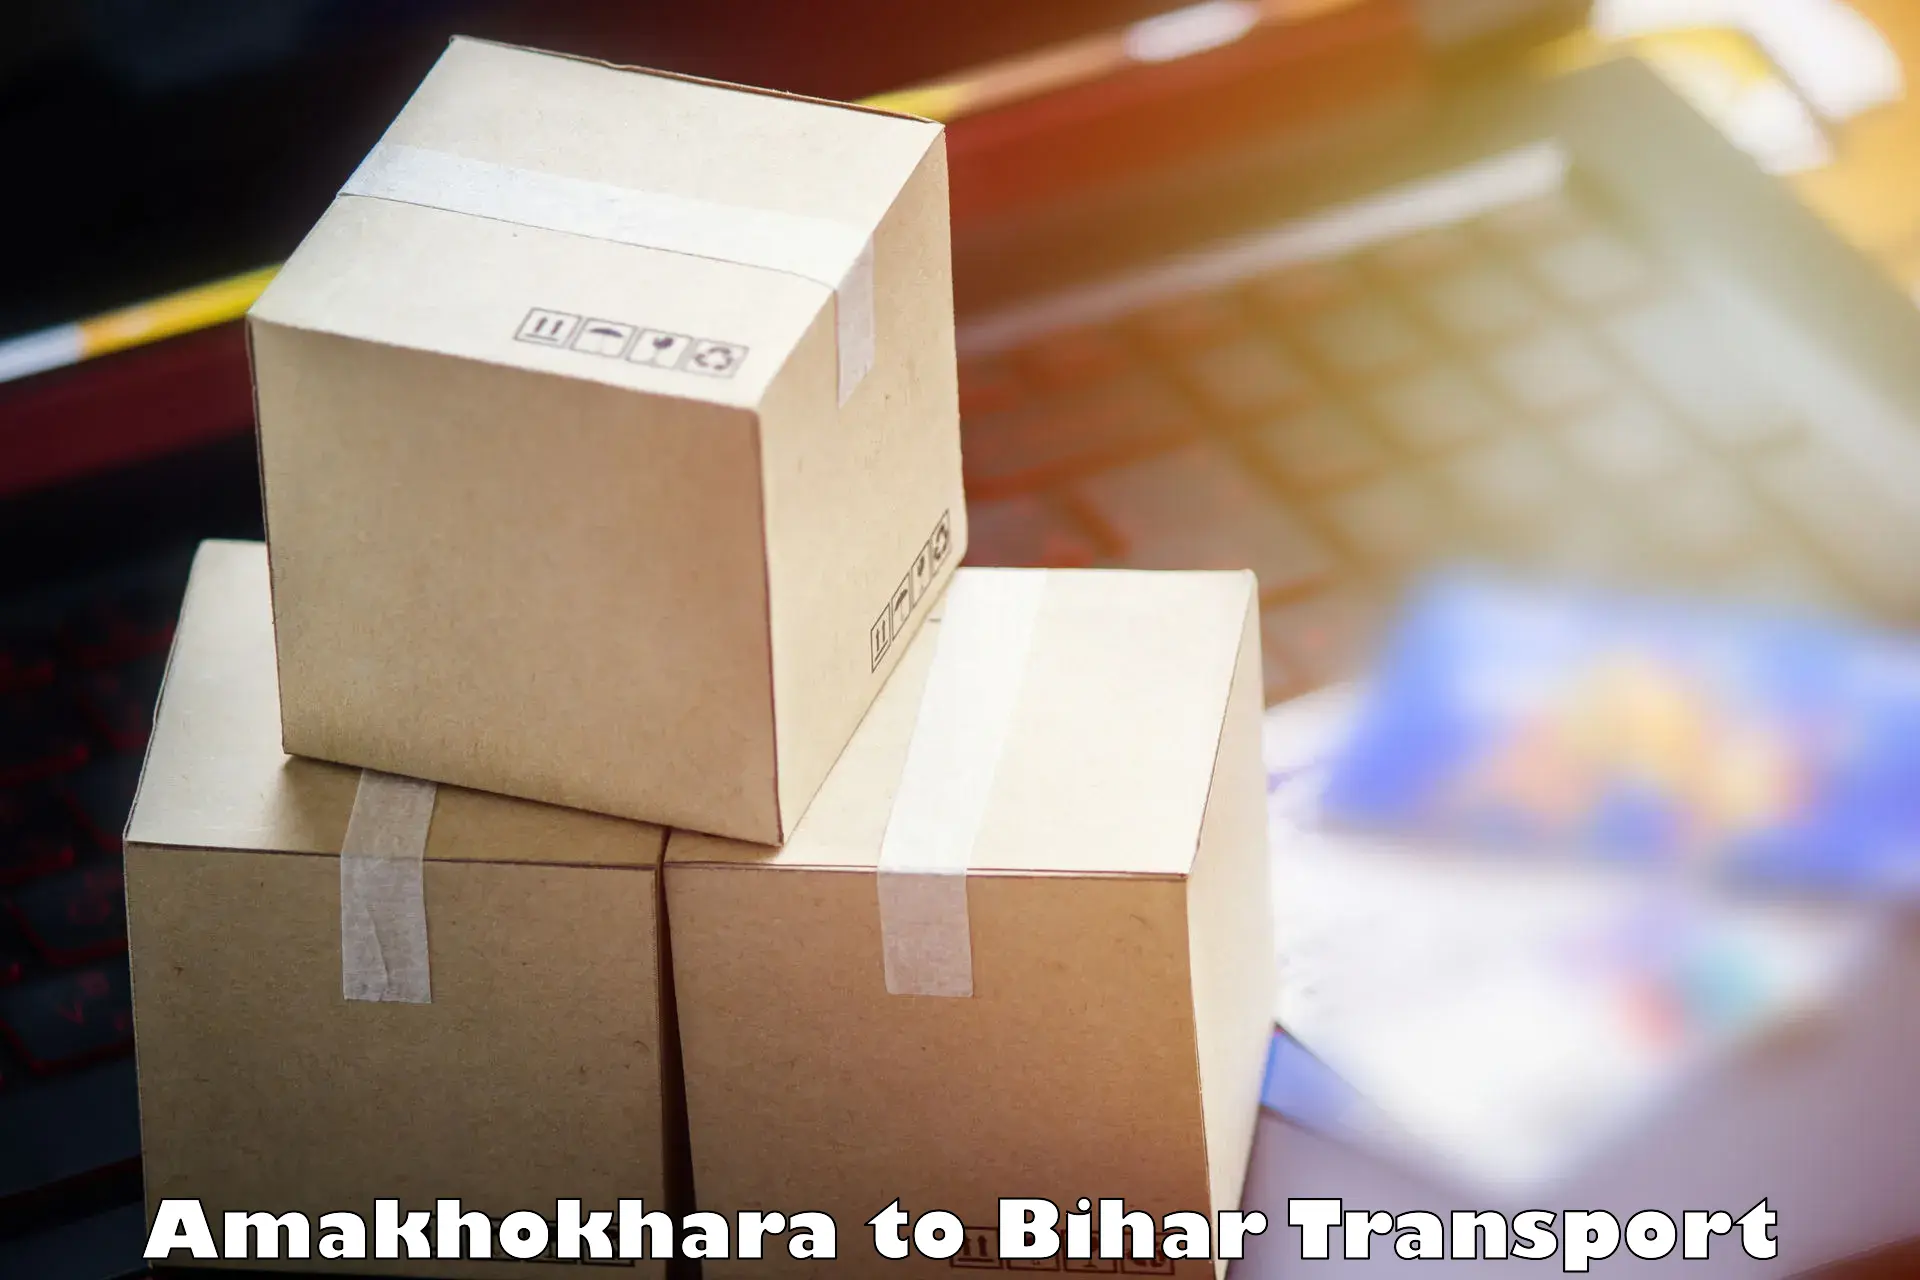 Commercial transport service Amakhokhara to Phulparas